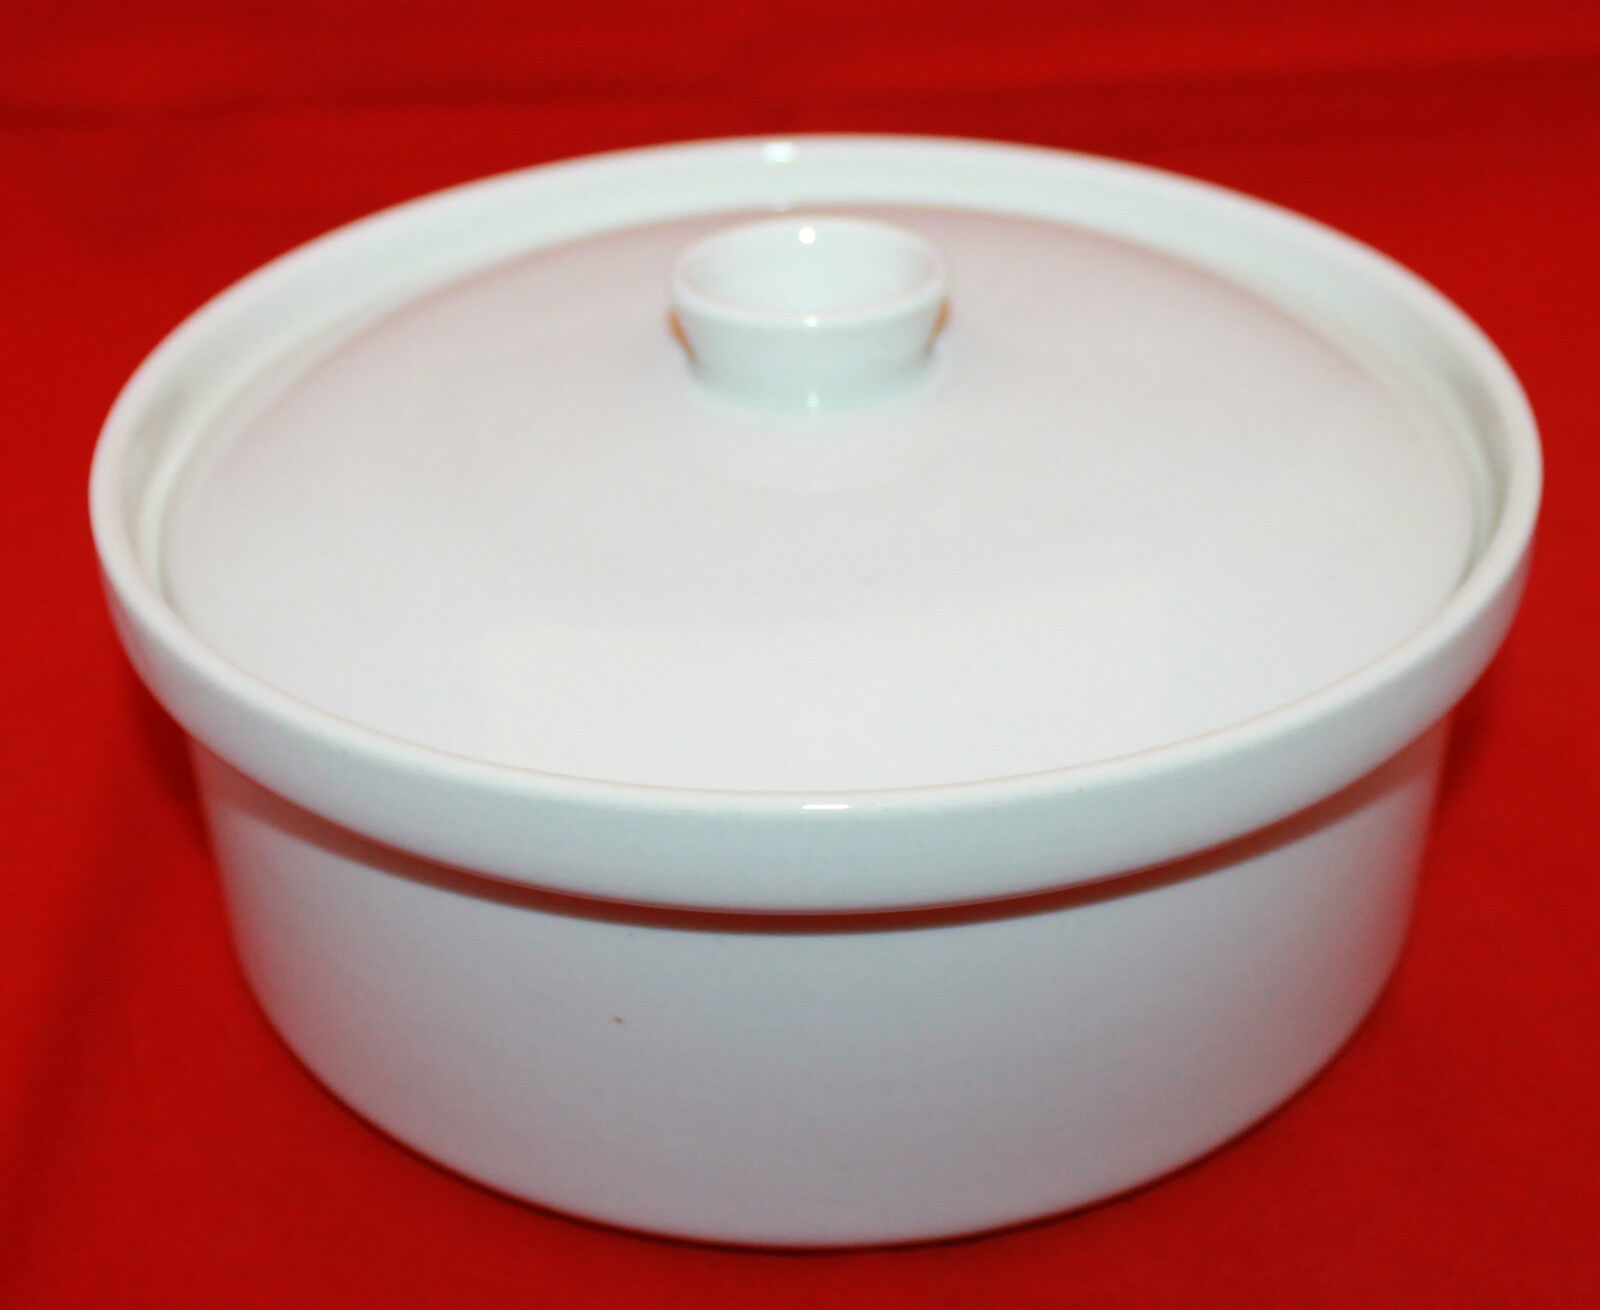 Primary image for Arabia Finland White Round Casserole Oven Serving Vegetable Bowl Lid  8" 20cm 